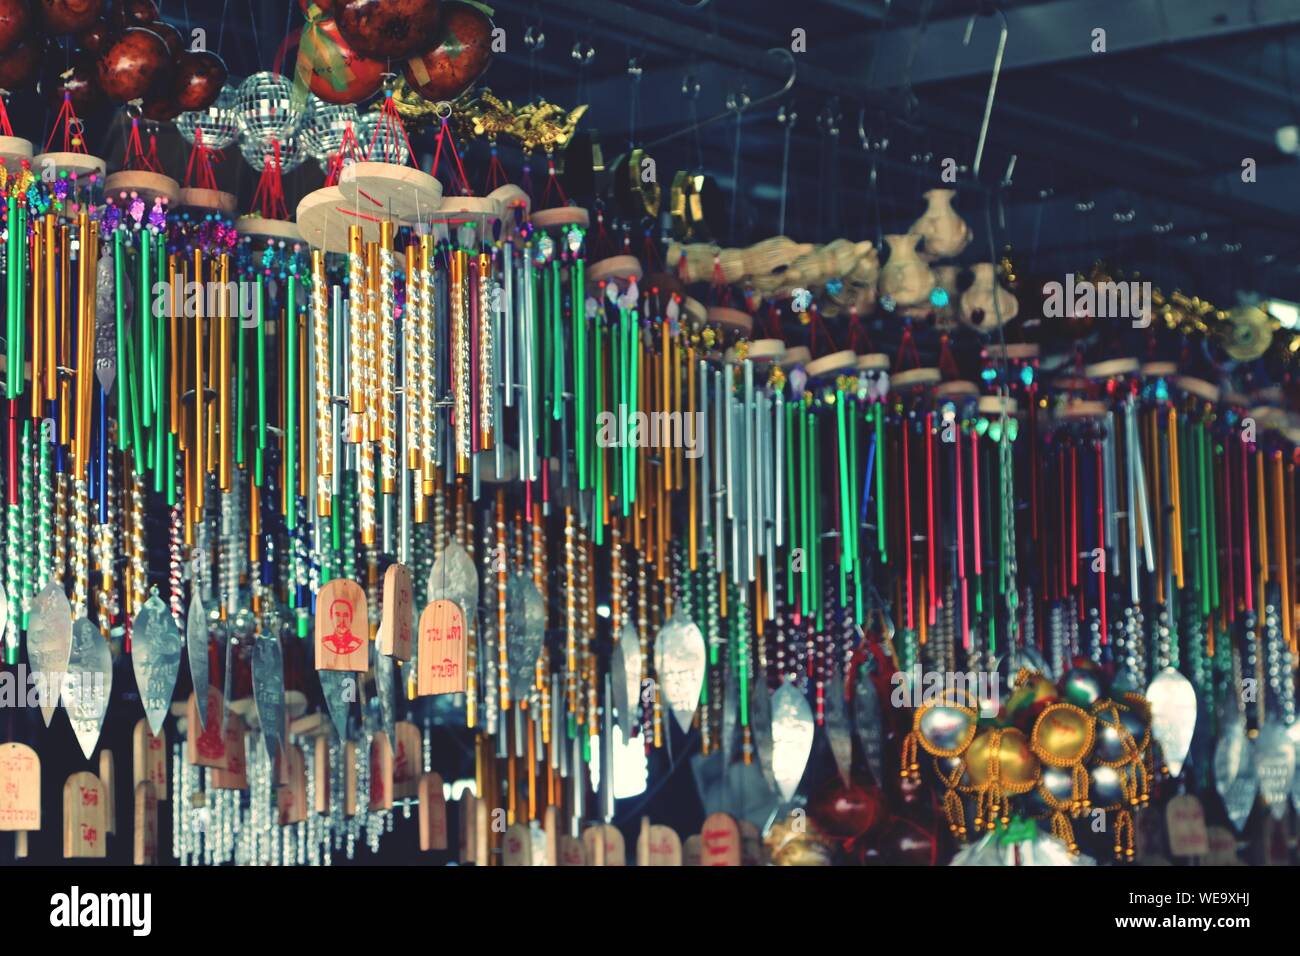 Various Wind Chimes Hanging For Sale At Market Stall Stock Photo